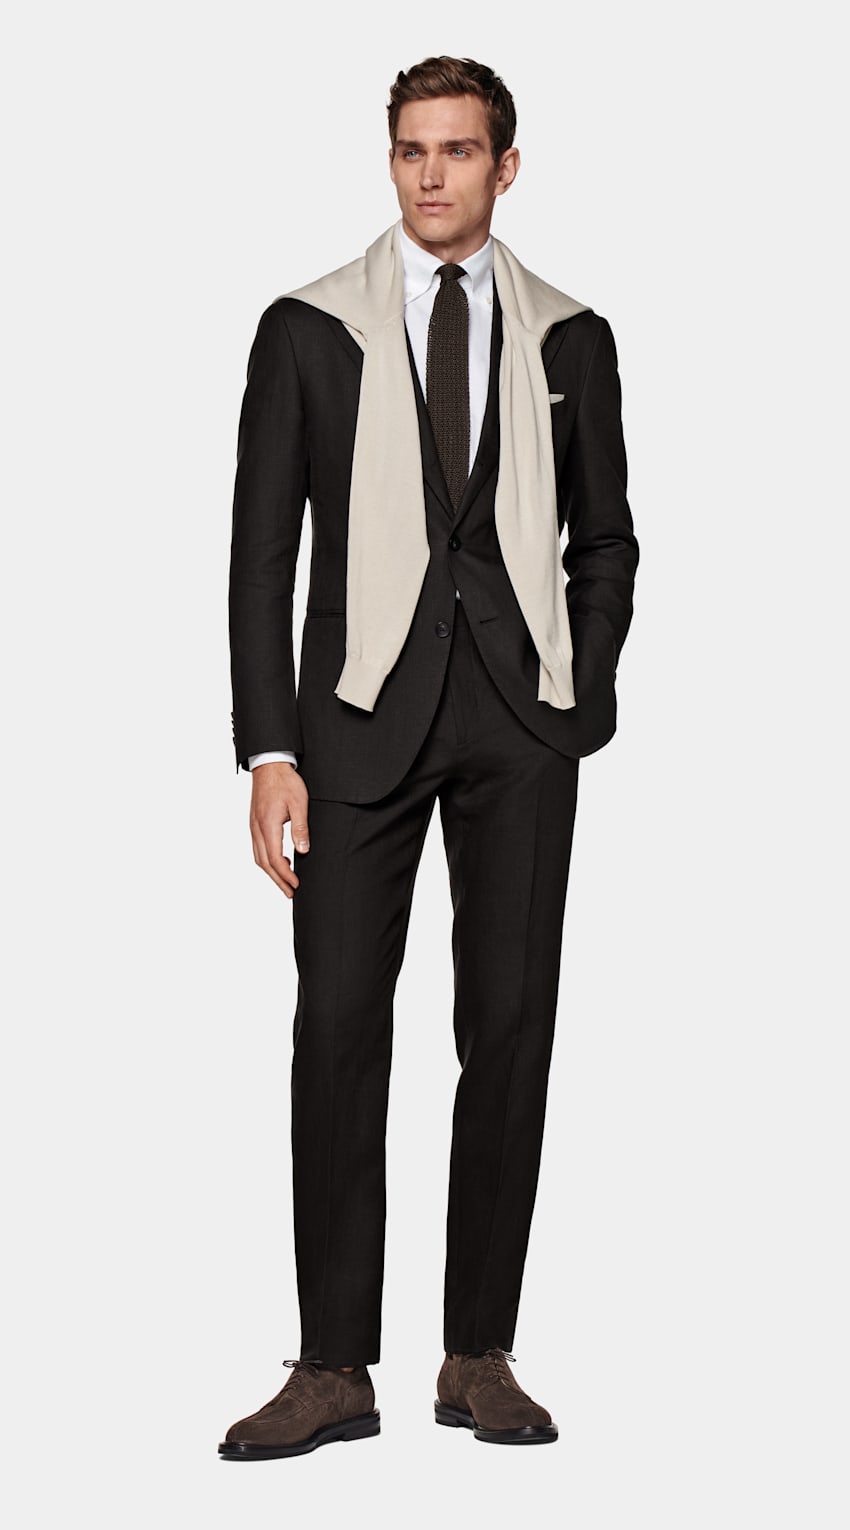 SUITSUPPLY Pure Linen by Di Sondrio, Italy Dark Brown Relaxed Fit Roma Suit